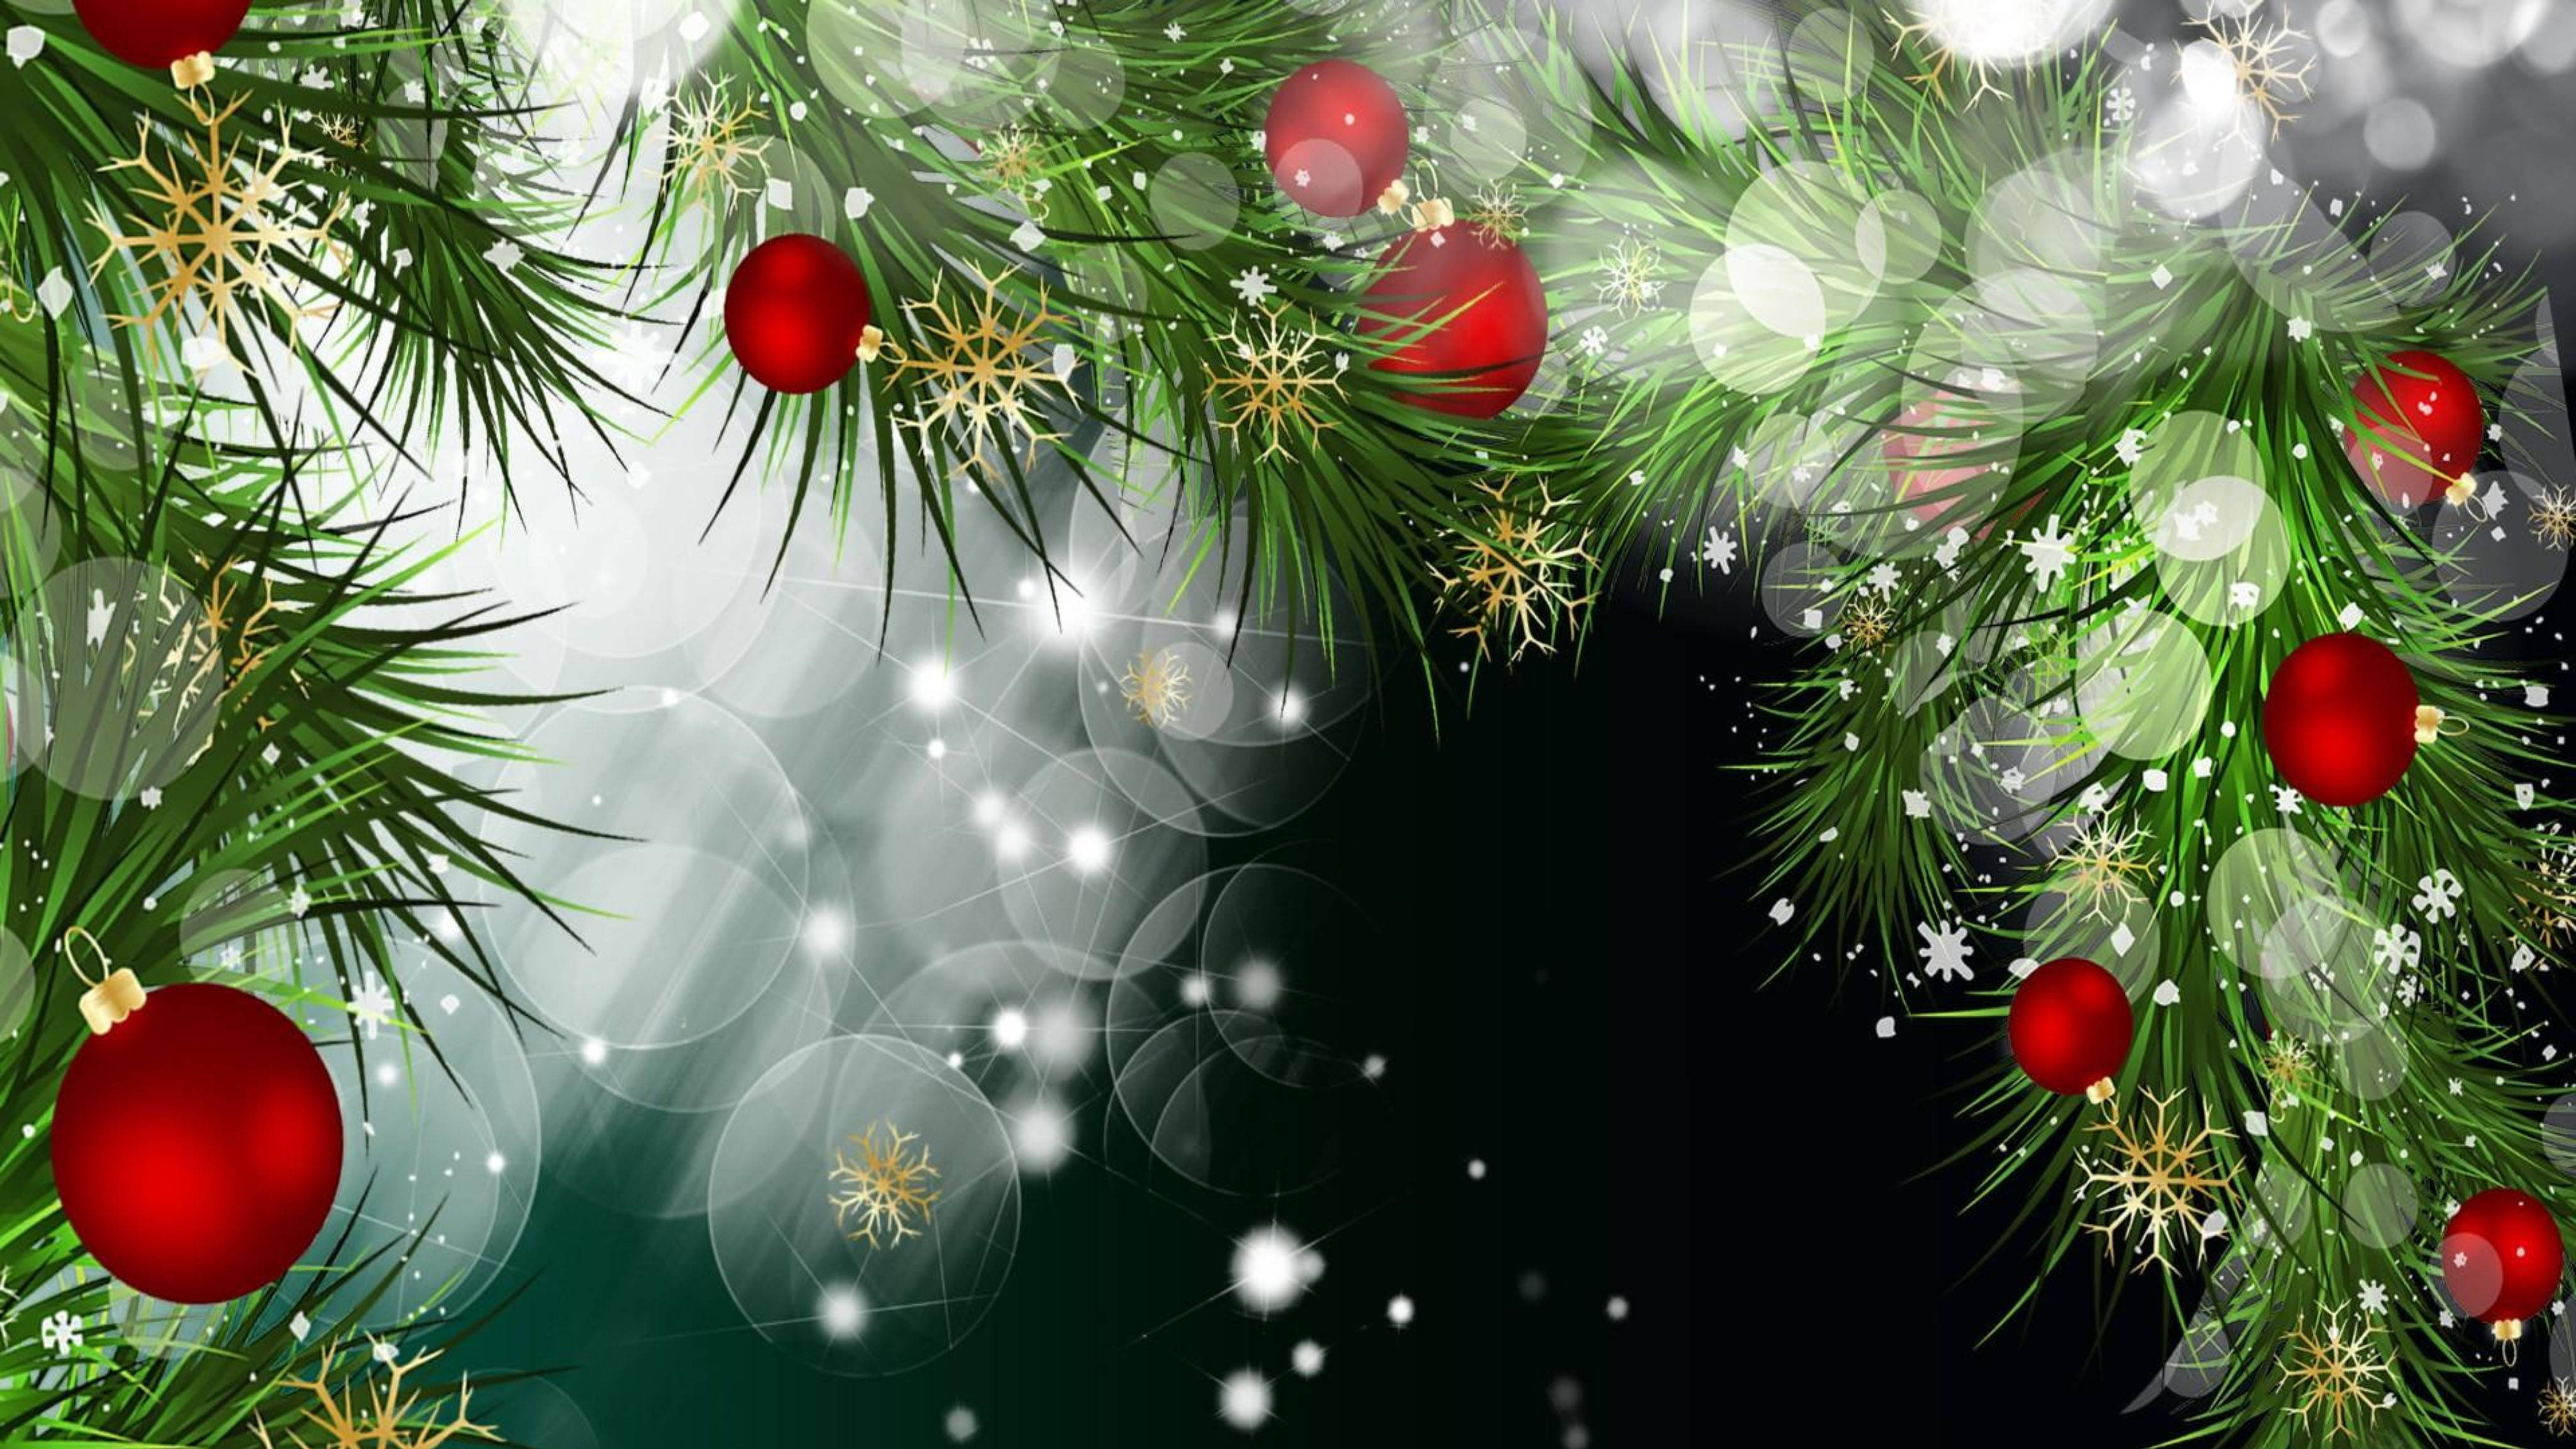 Download Red Christmas Balls At Green Spruce Wallpaper